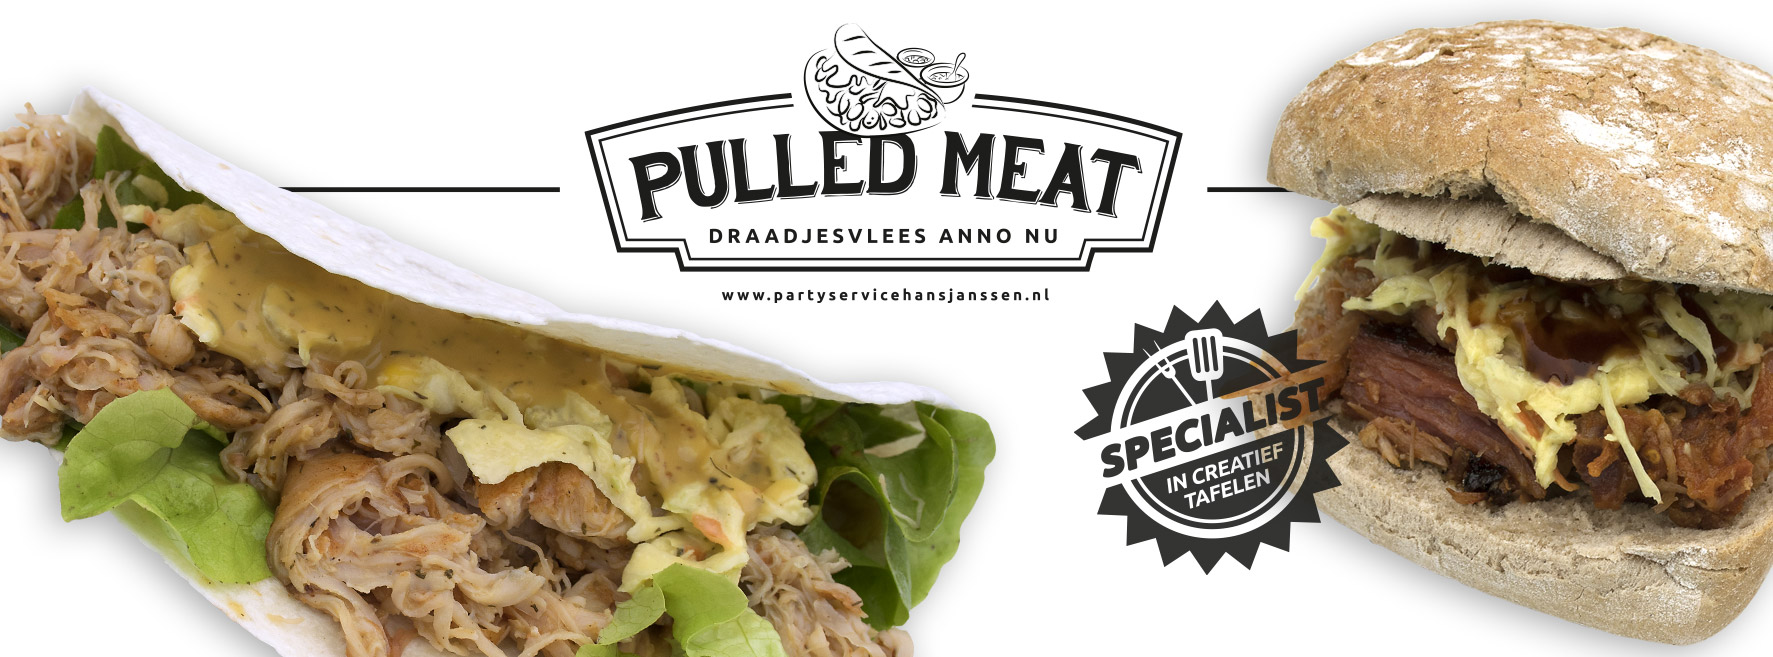 pulled-meat-banner